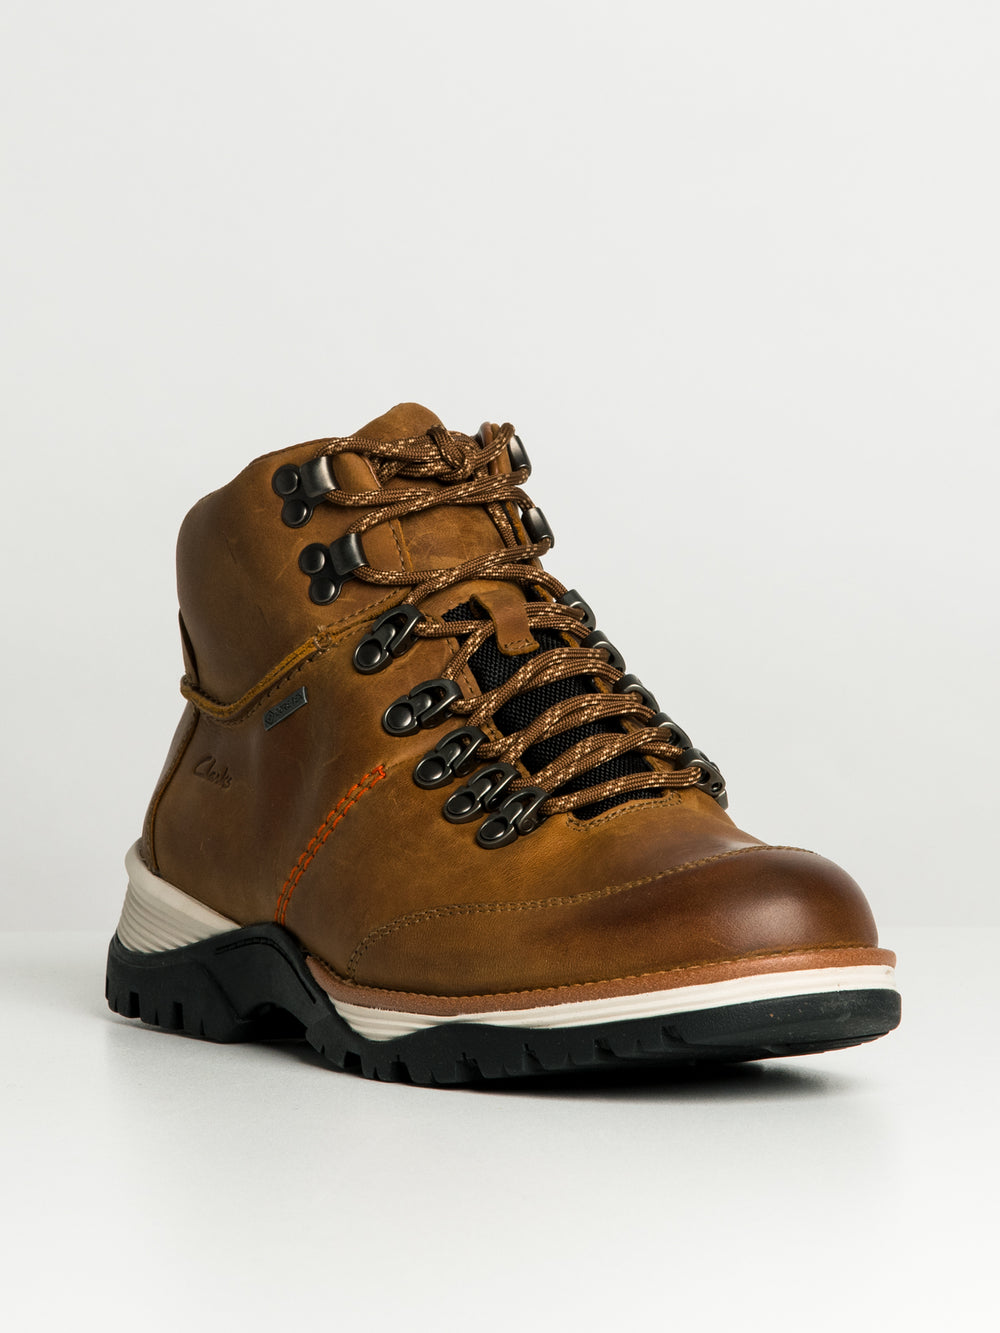 MENS CLARKS TOPTON PINE GTX BOOT - CLEARANCE